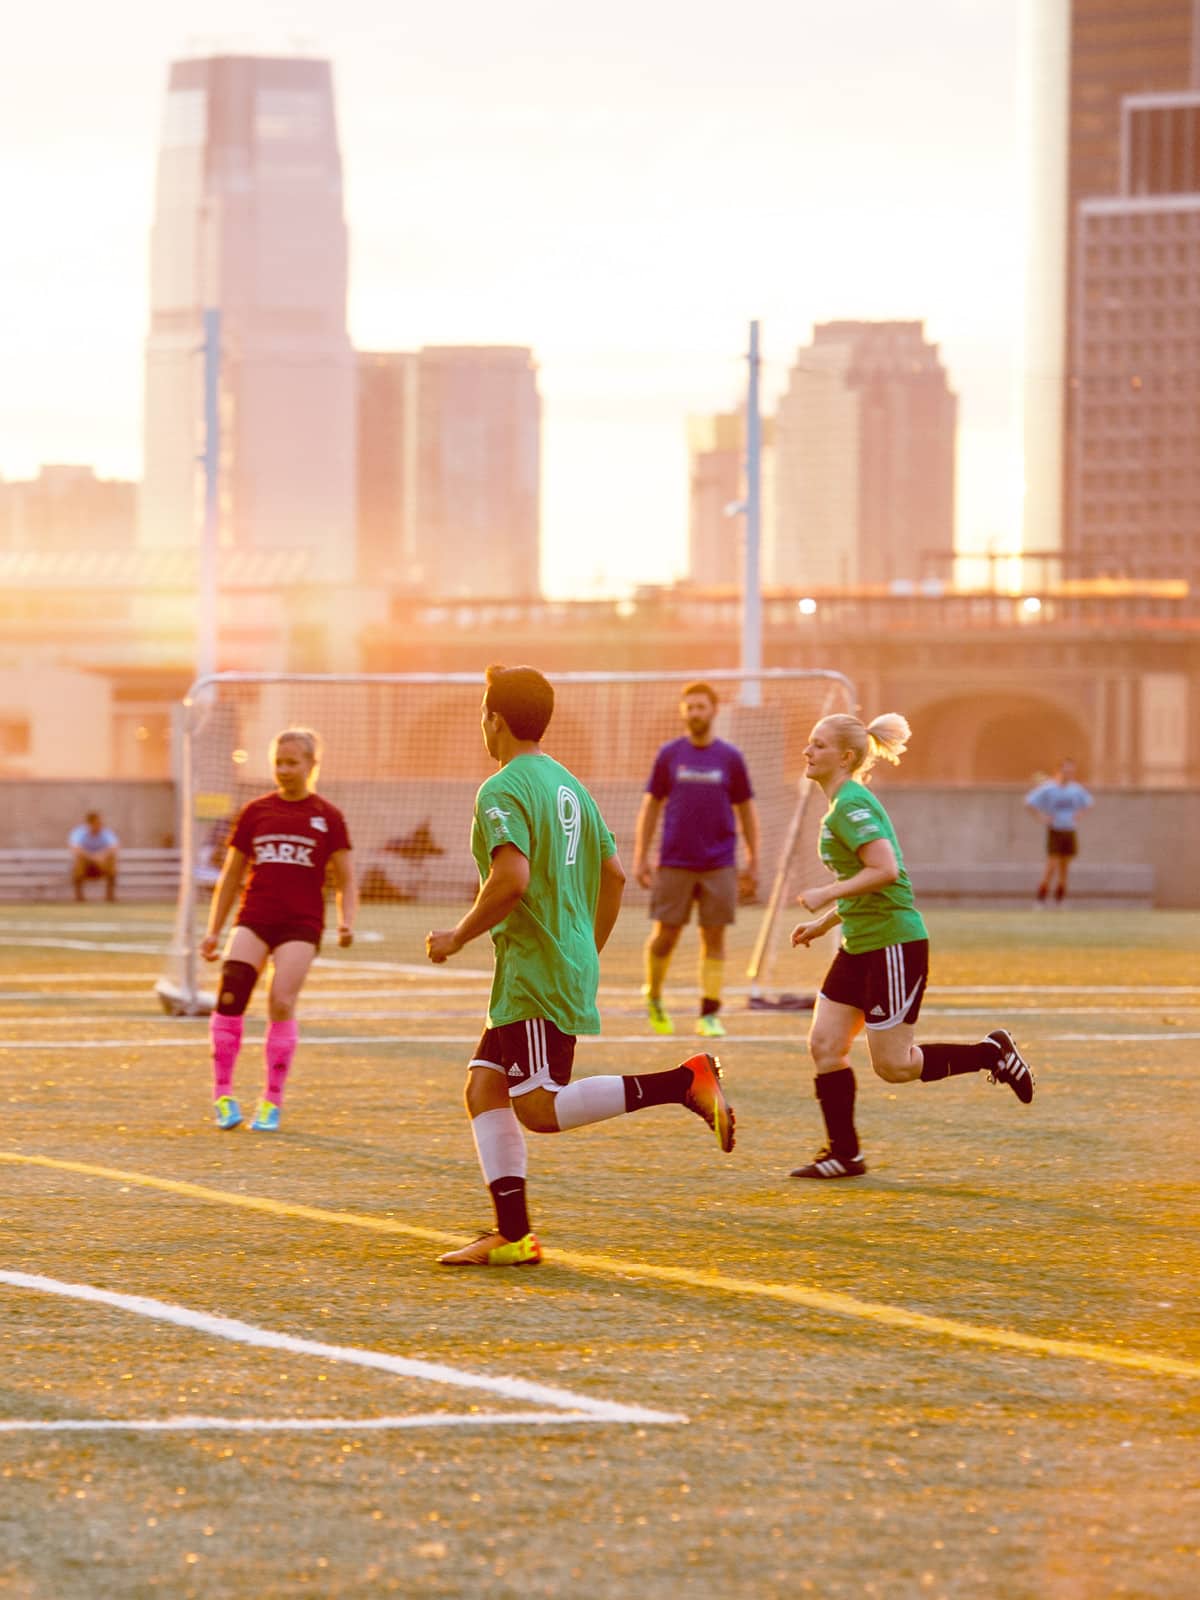 People playing soccer at sunset.